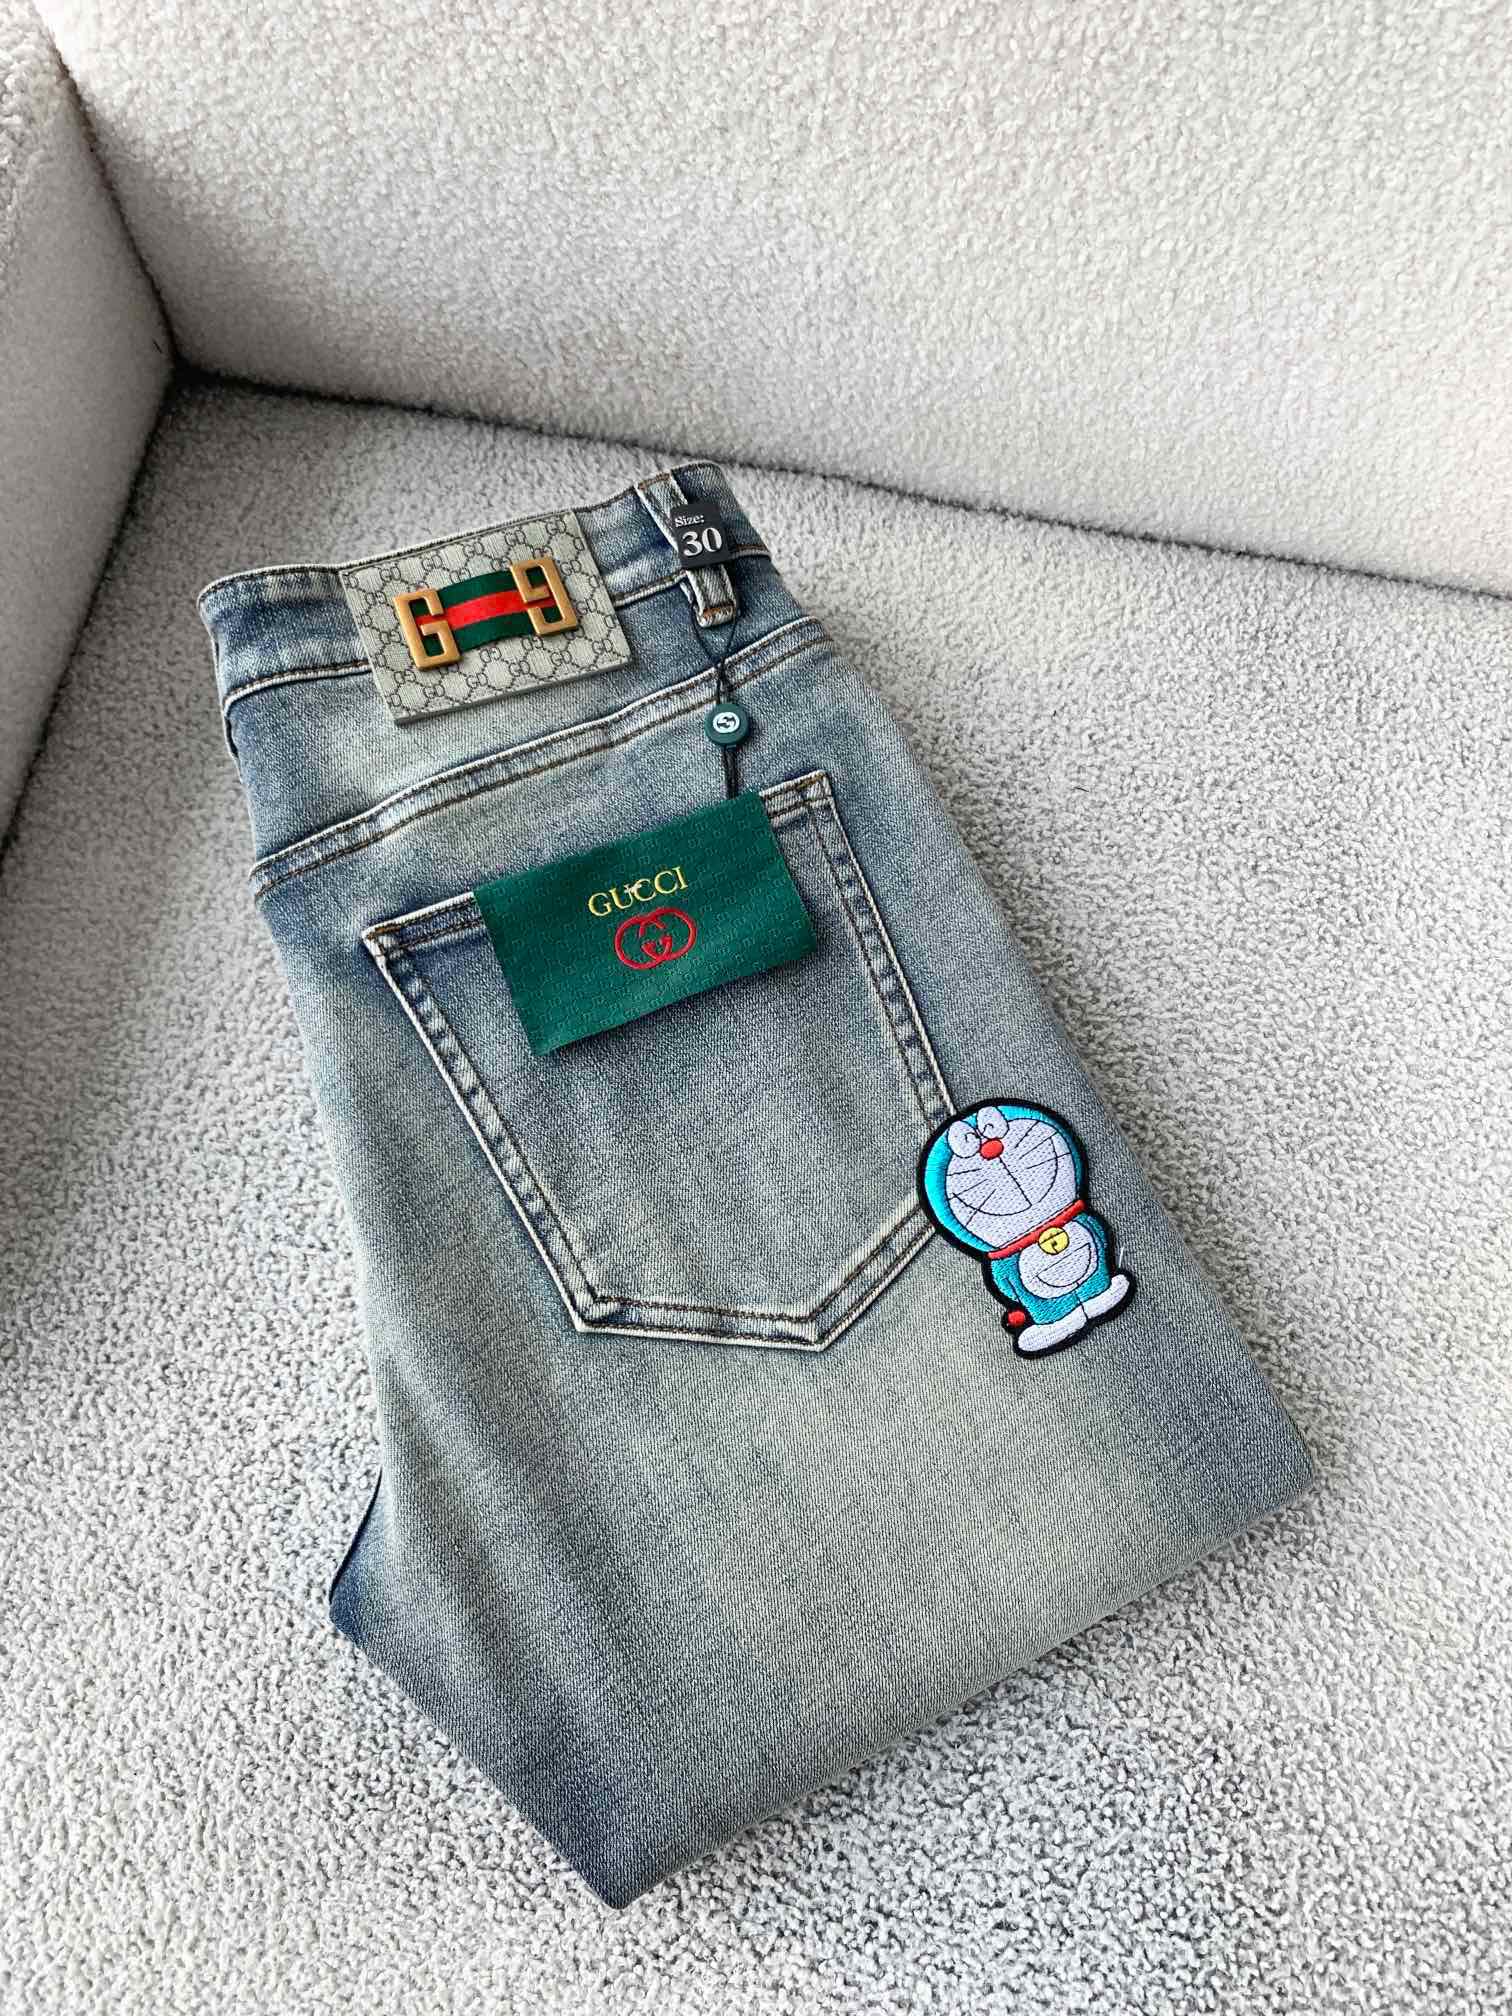 Gucci Shop
 Clothing Jeans Embroidery Men Fall/Winter Collection Vintage